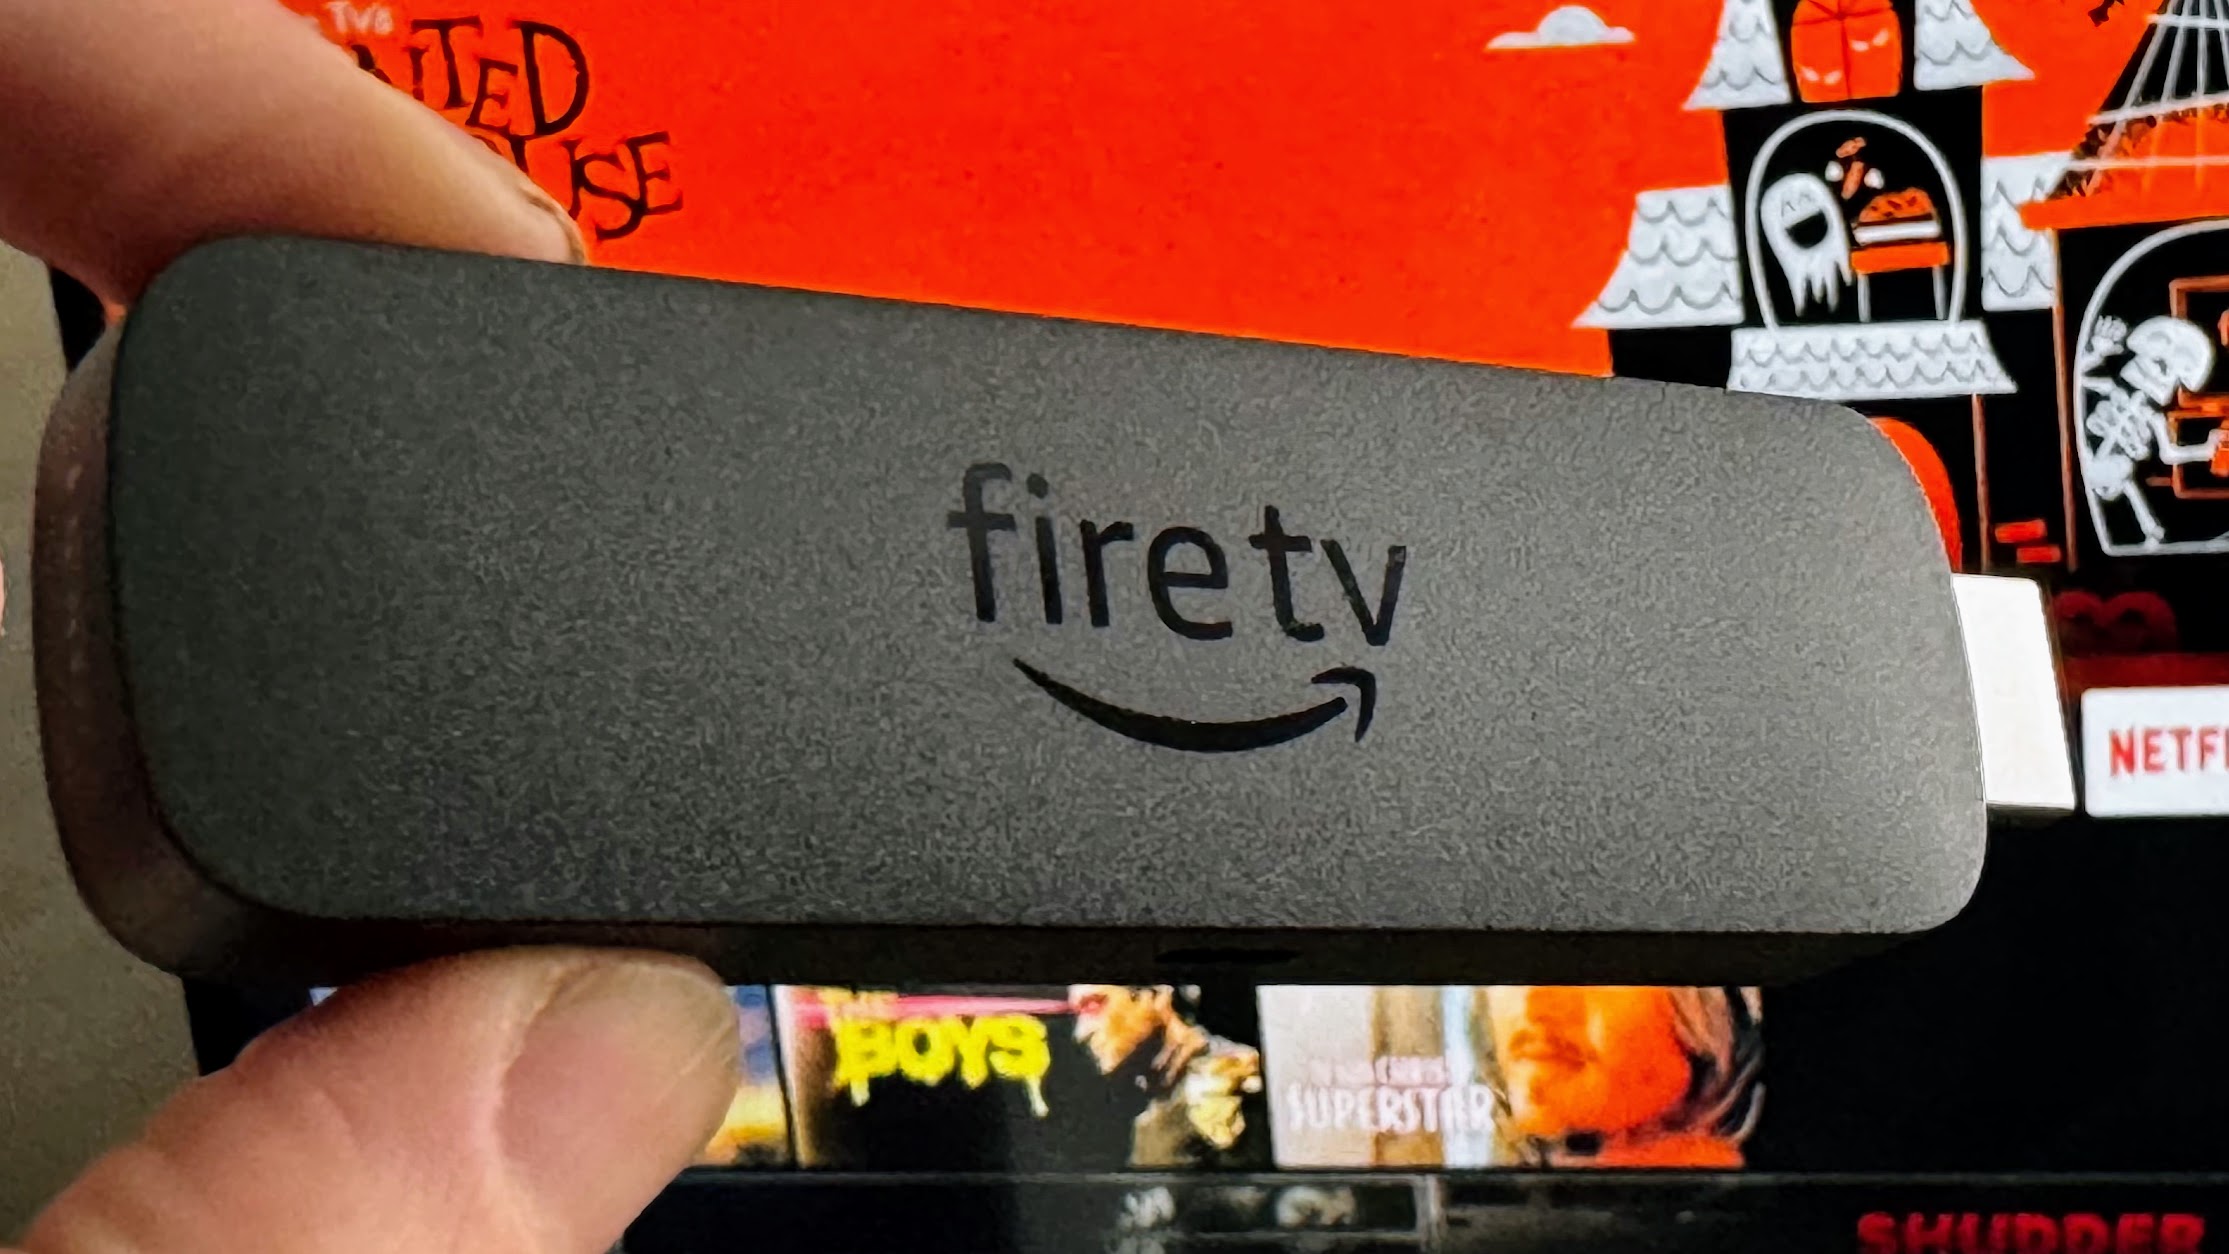 Get 42% off the brand new Amazon Fire TV Stick 4K